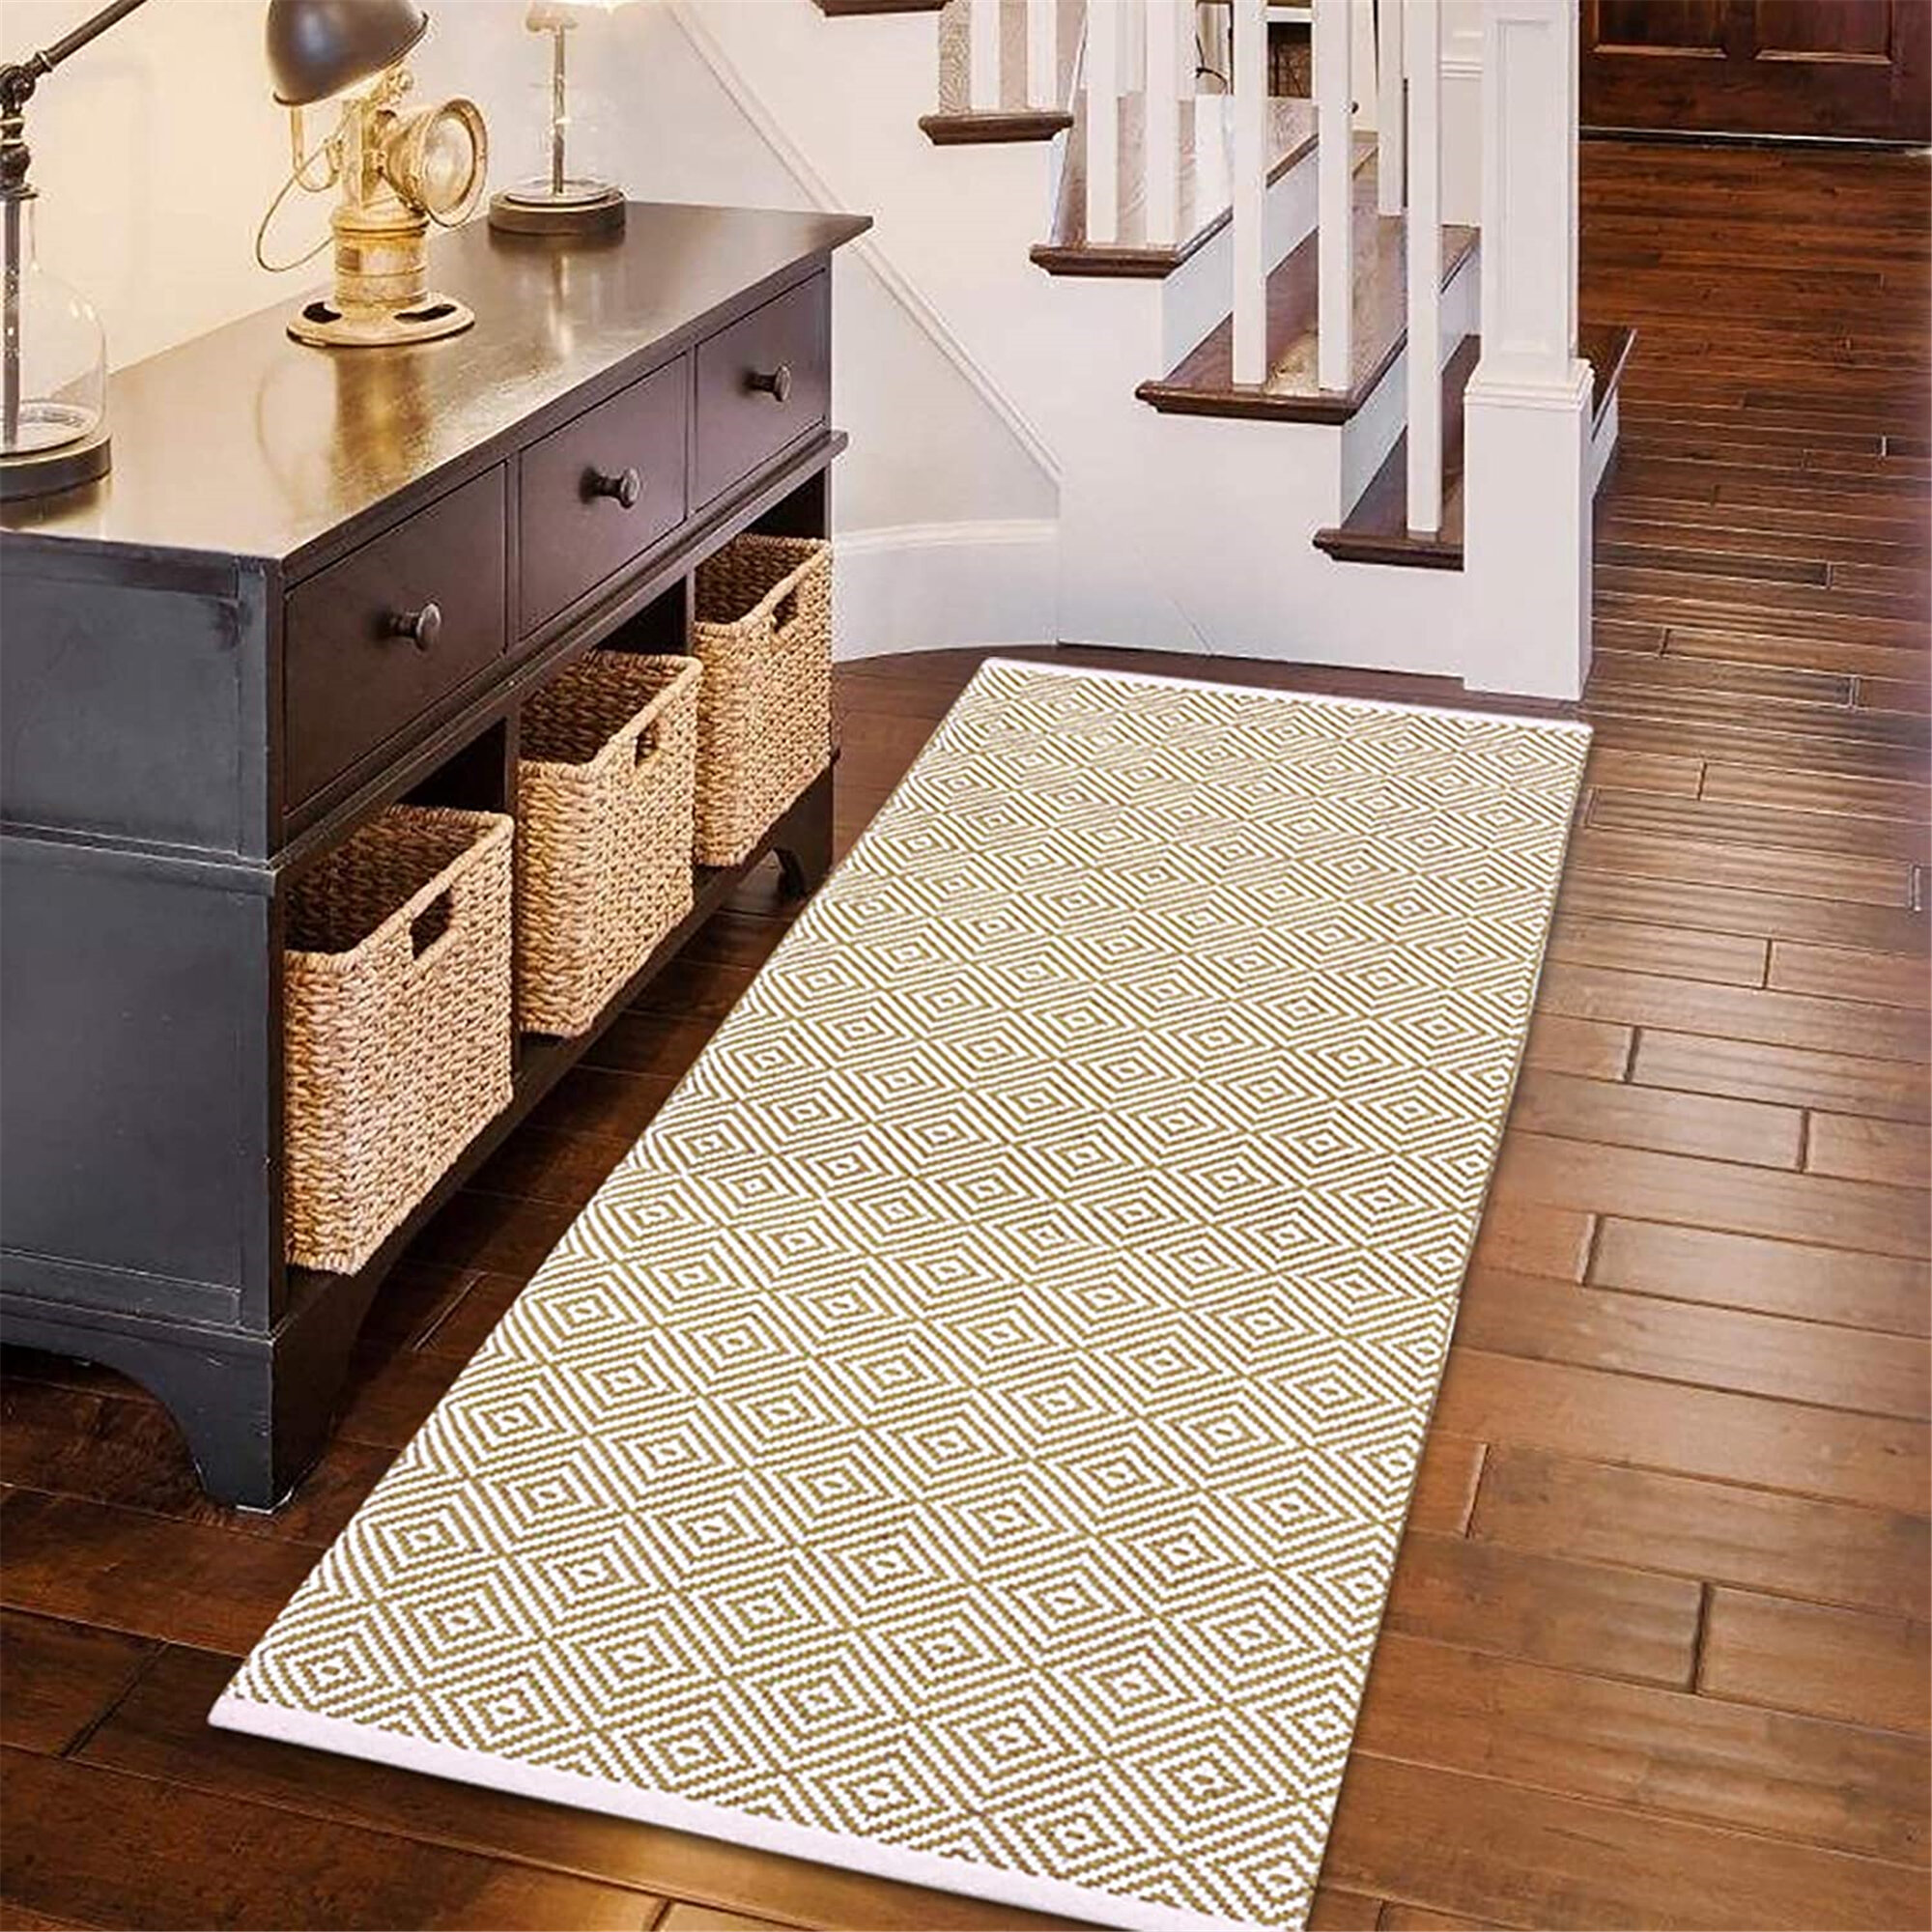 Cream Geometric Rug Eco Friendly Recycled Cotton Sustainable Indoor Runner Mat